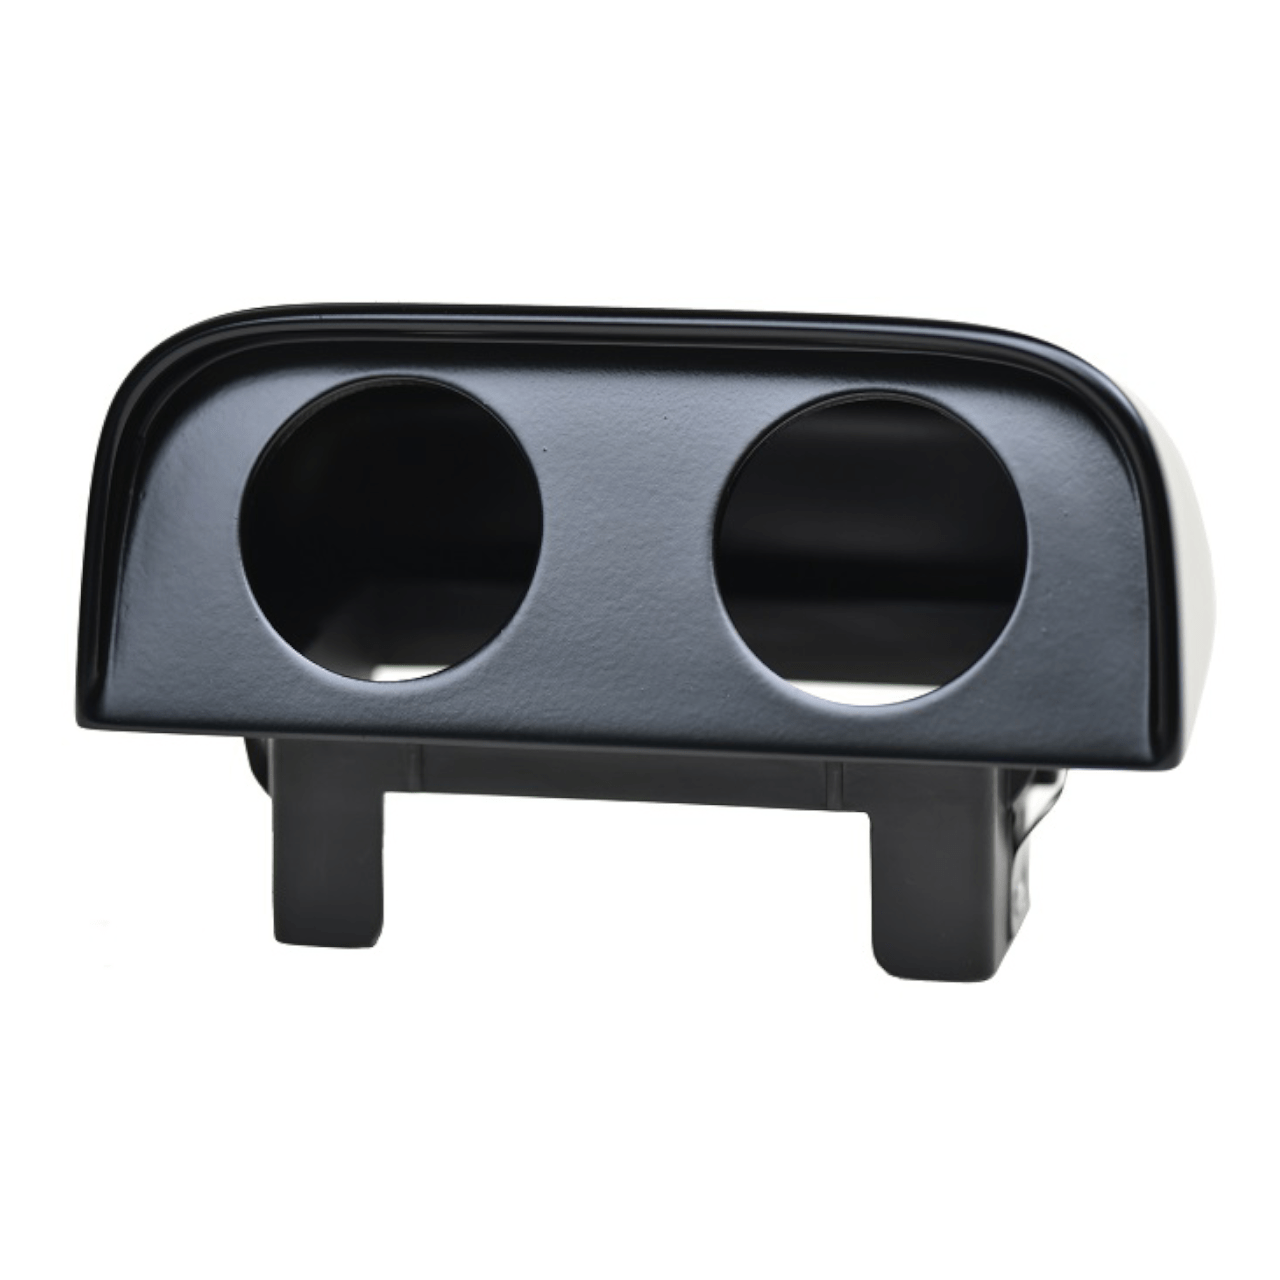 Instrument holder for the dashboard suitable for VW T3 - BE-Vanlife